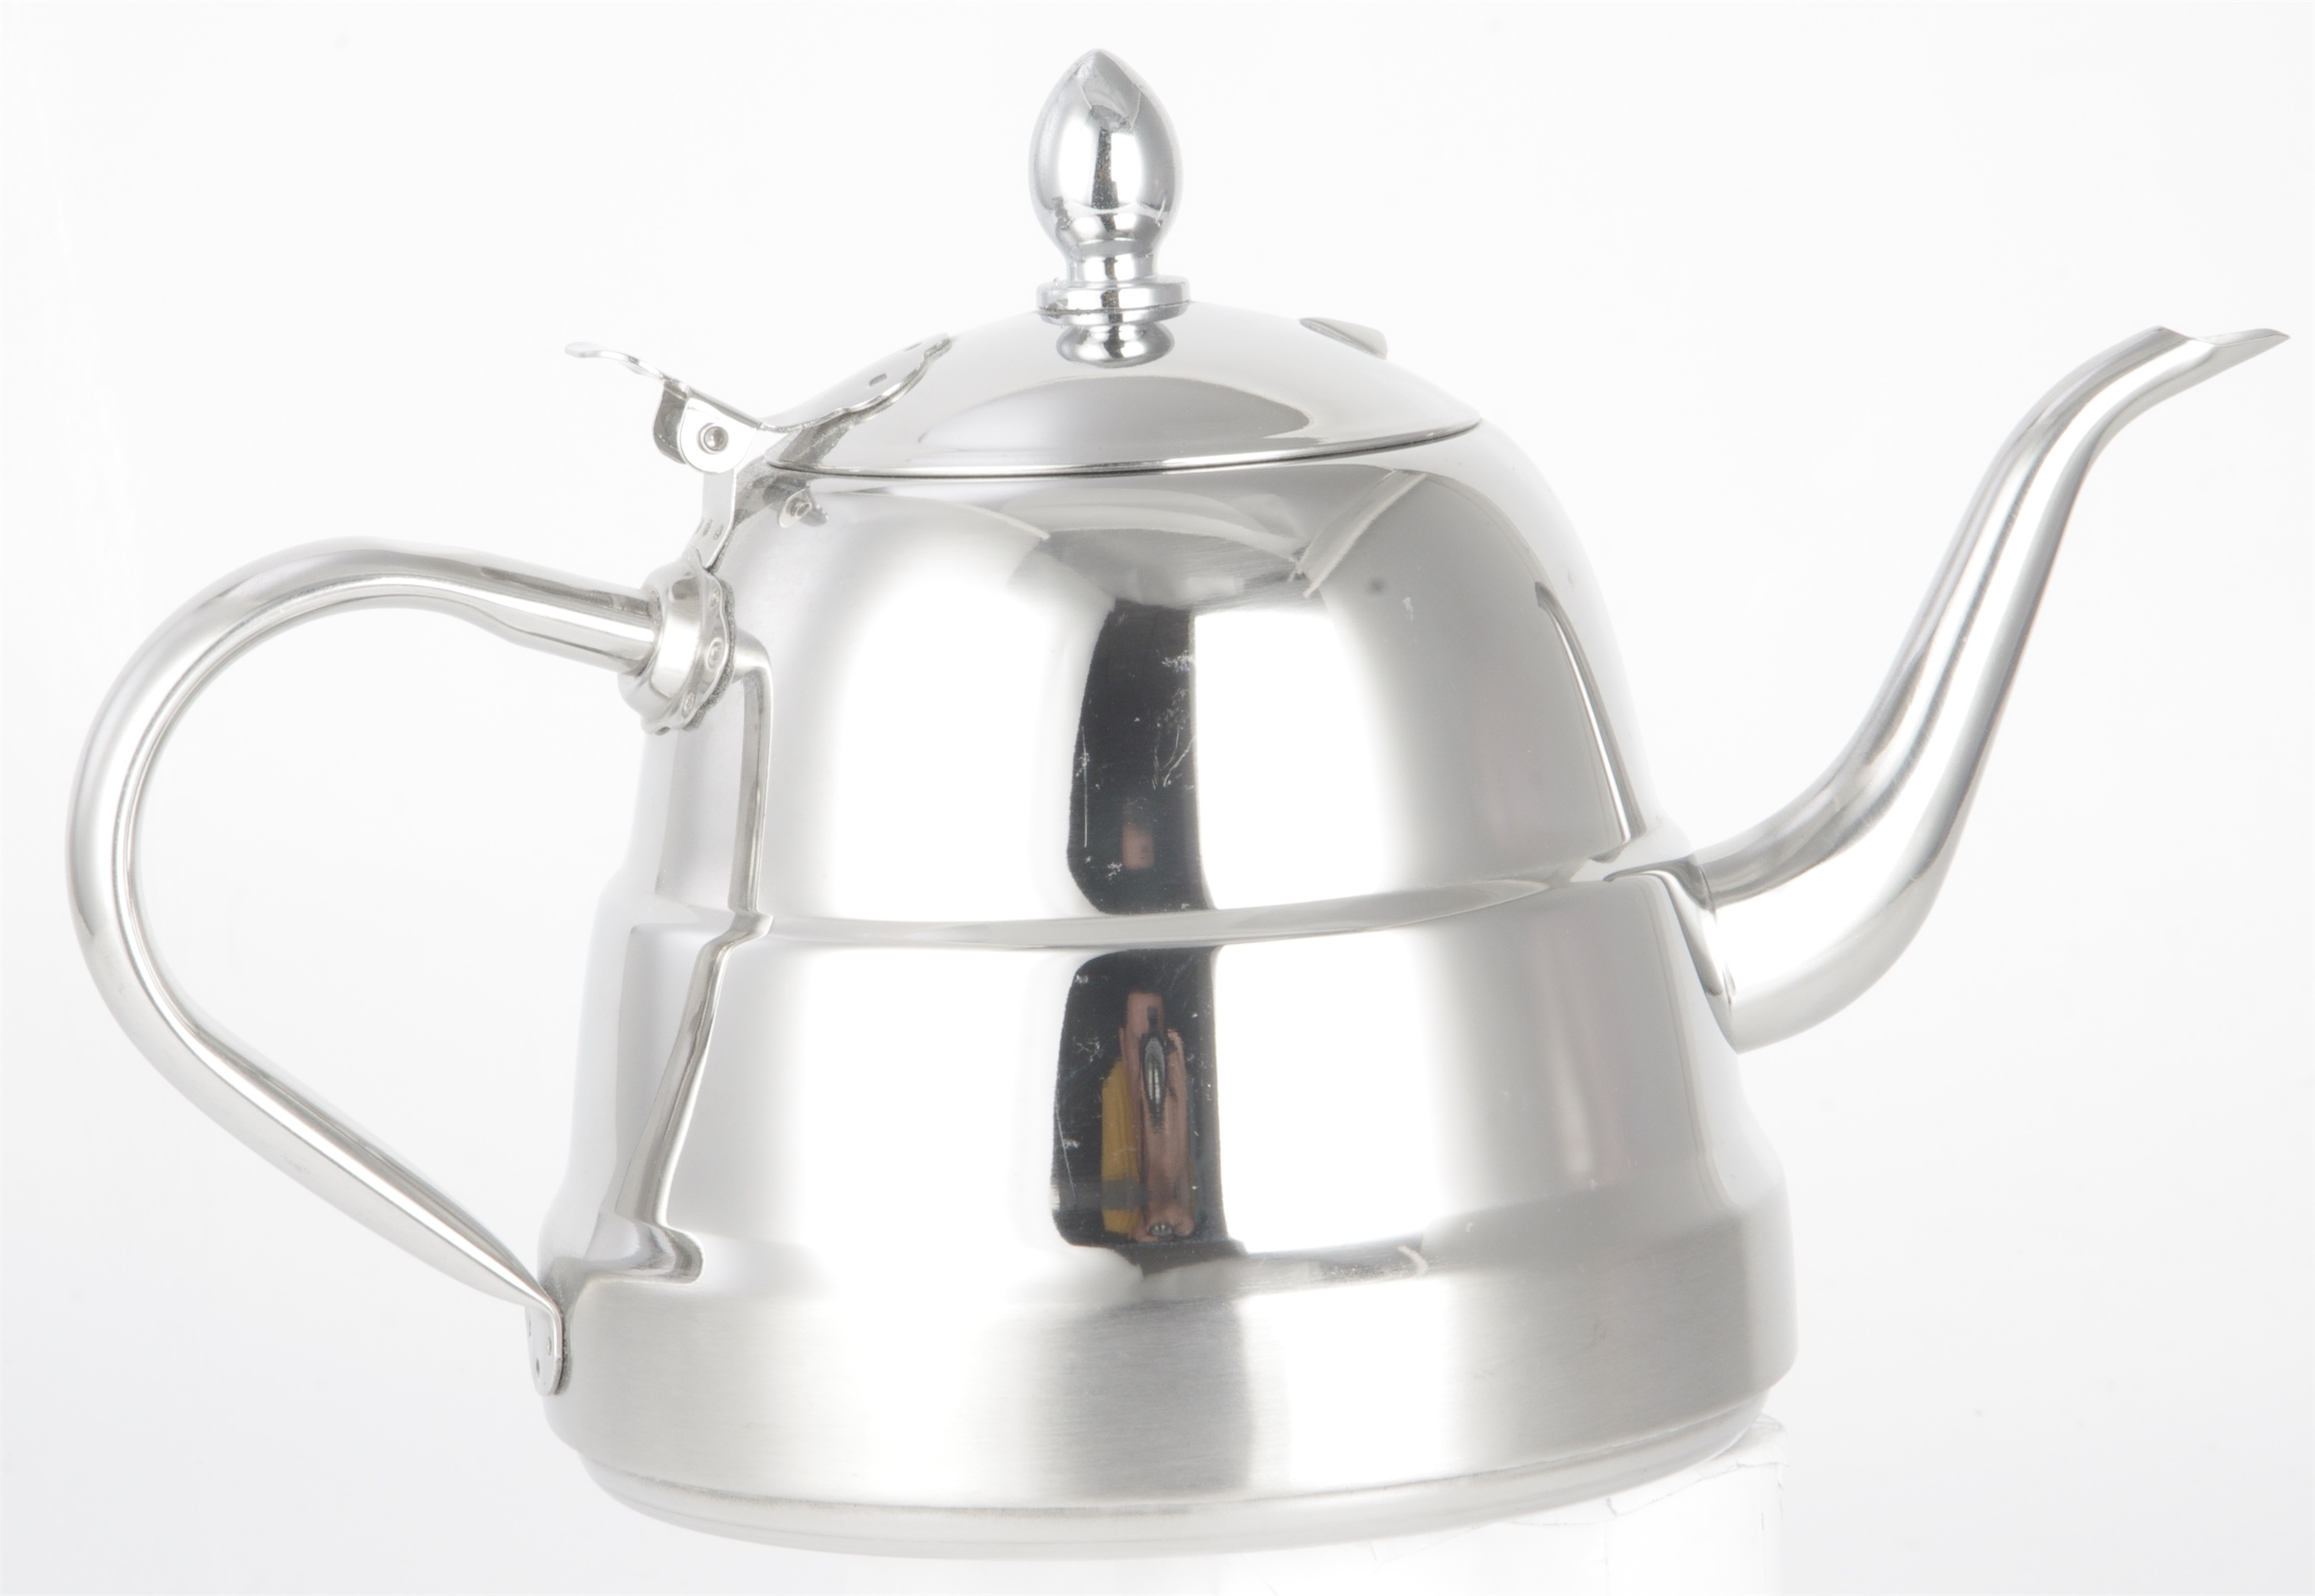 Evergreen brushed stainless tea kettle company for storage